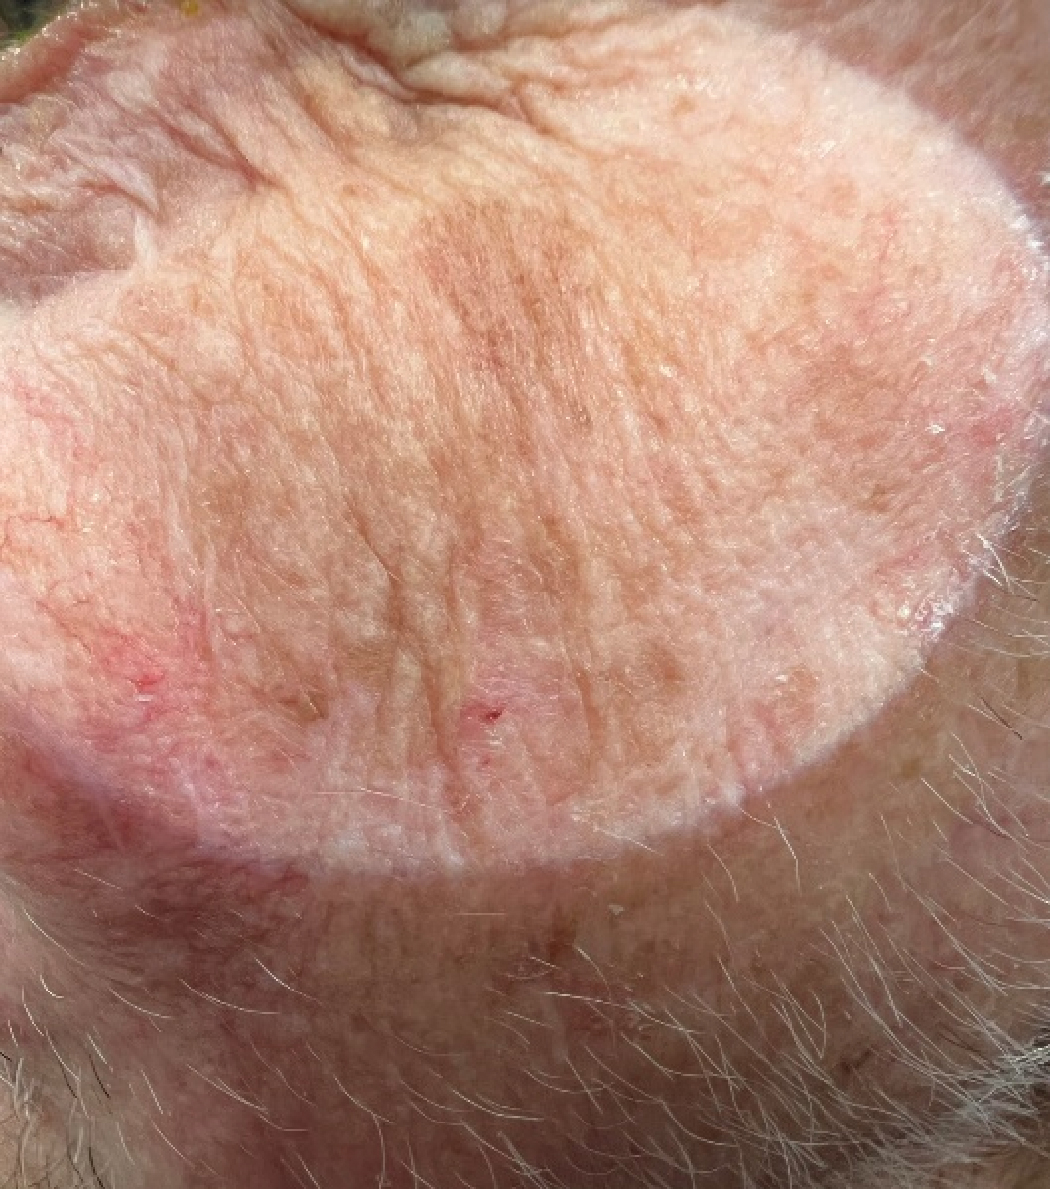 Solar lentigos and areas of actinic keratoses. These evenly hyperpigmented macules should be differentiated from the precancerous maligna, which has variable pigmentation and even more irregular borders.6 